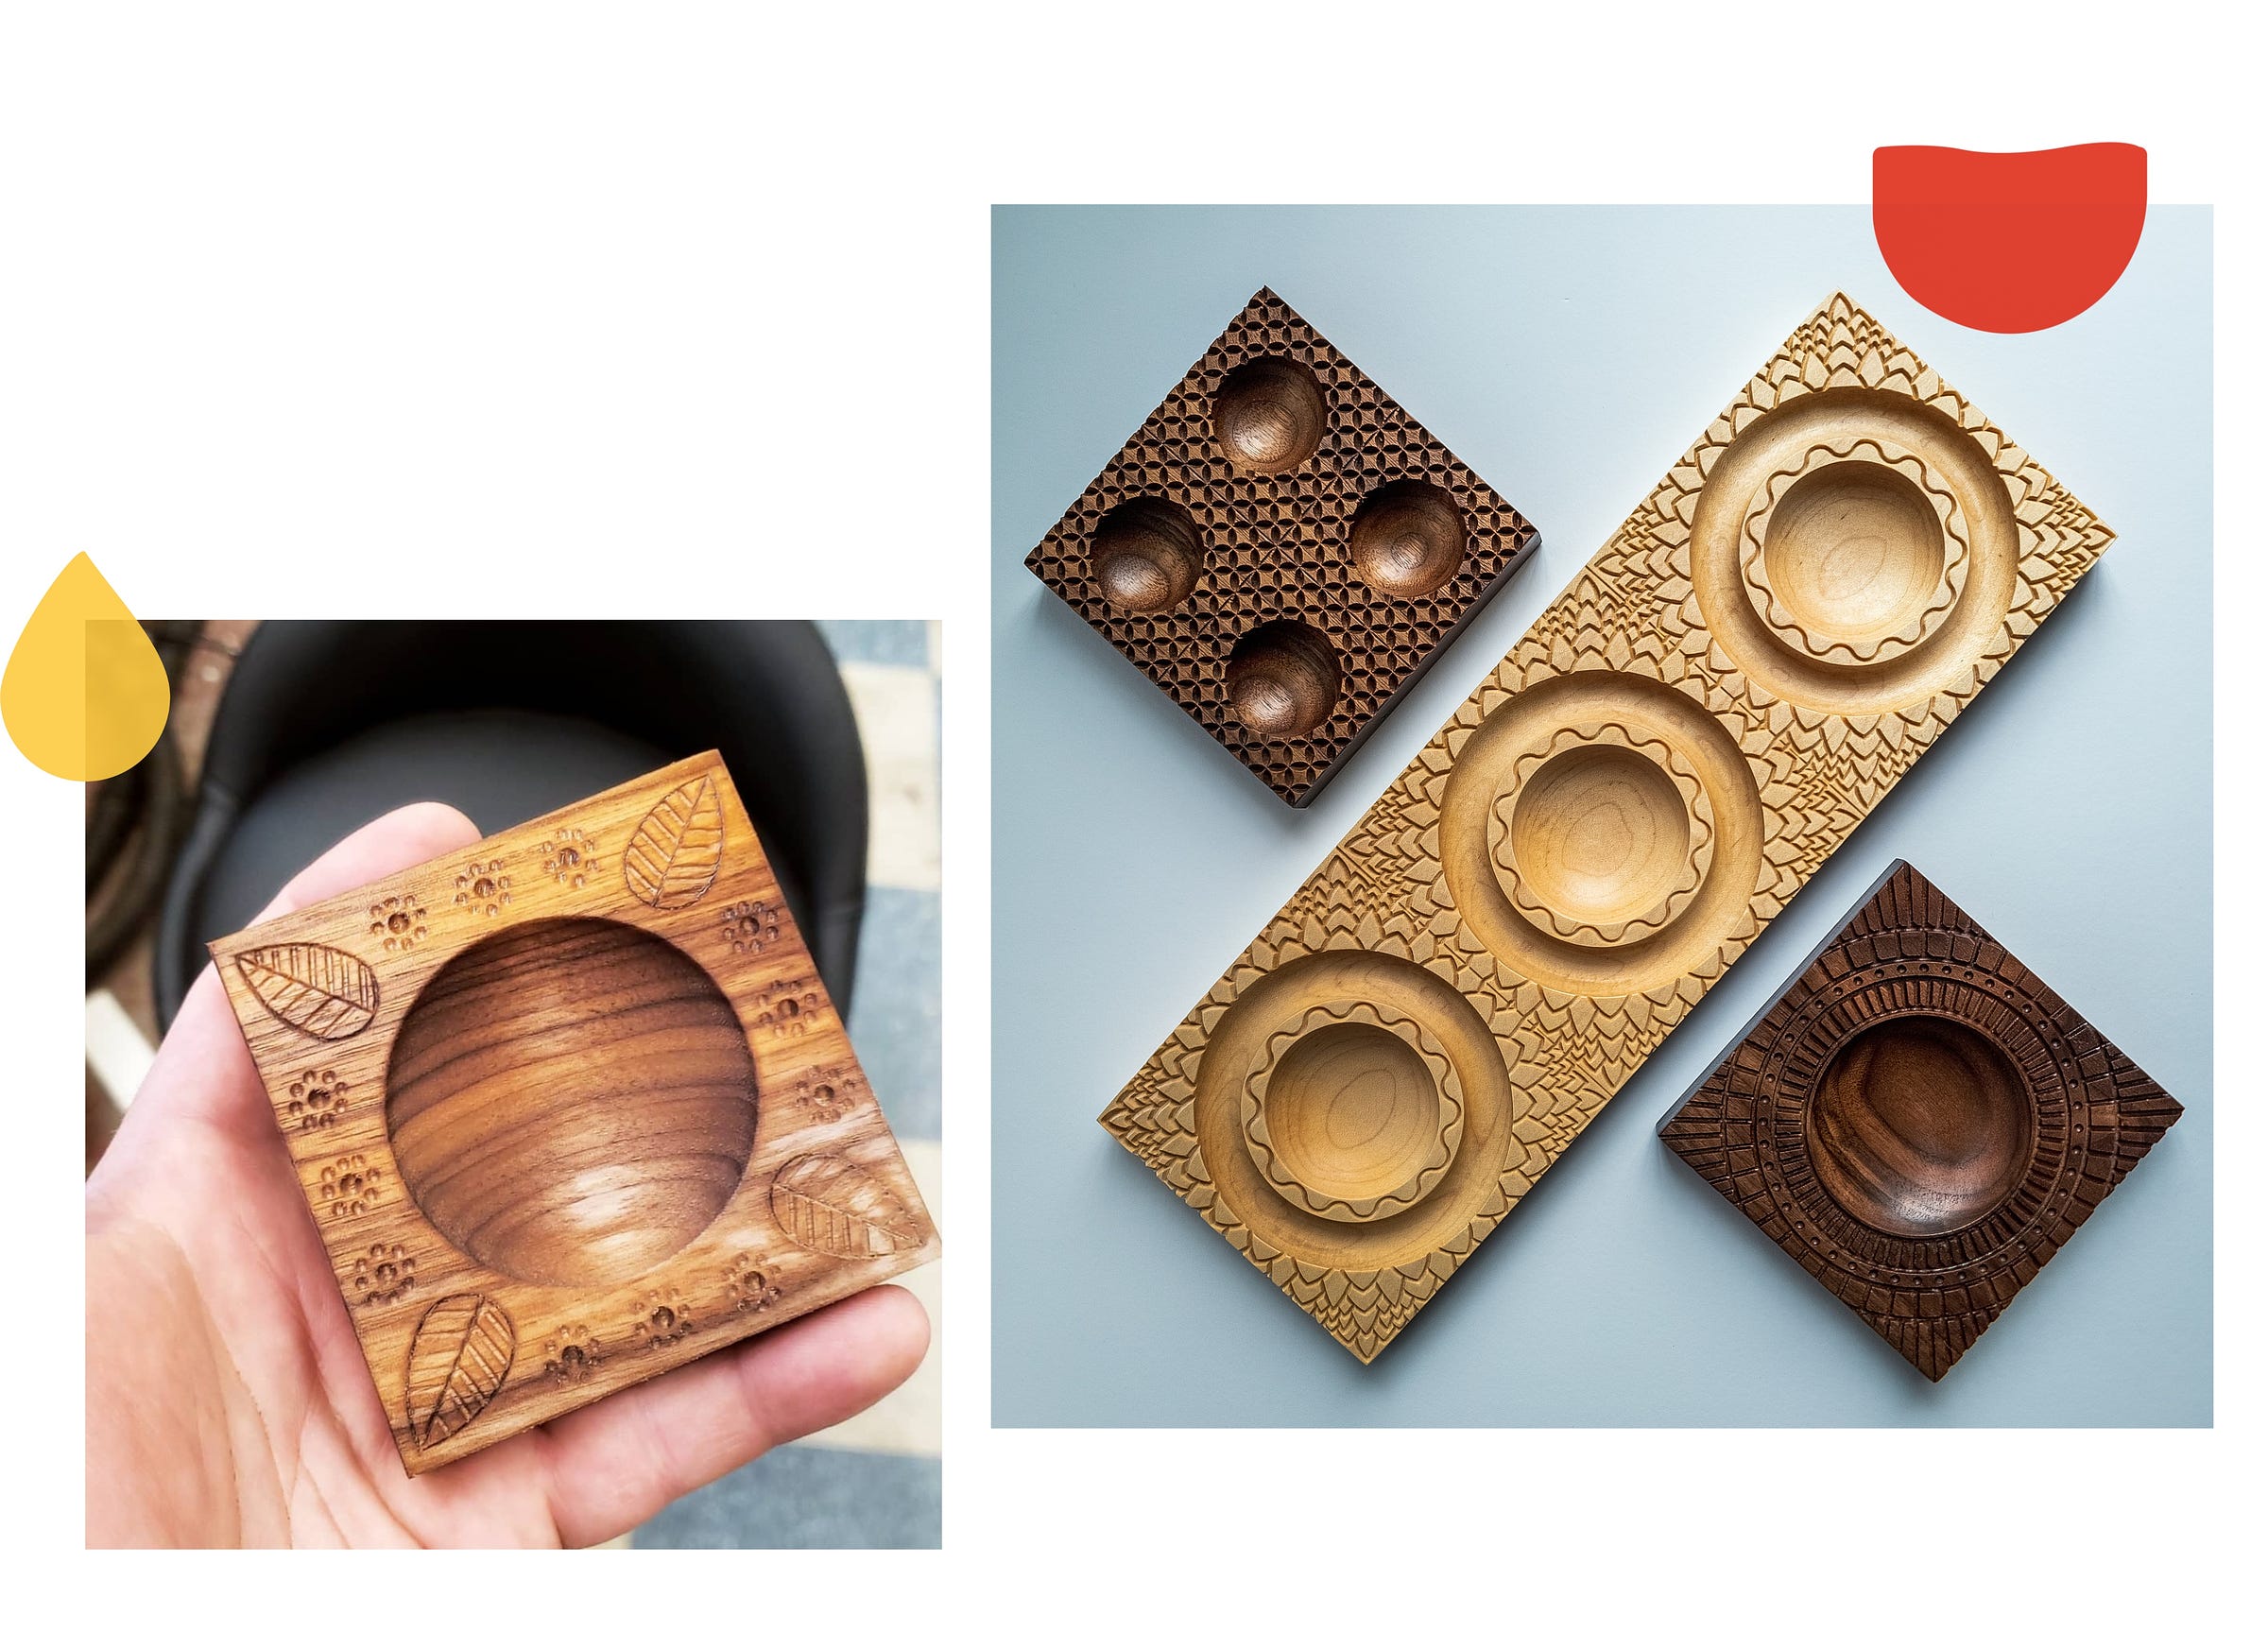 Two images, side by side, of carved woodwn ravioli molds with lots of intricate detailing